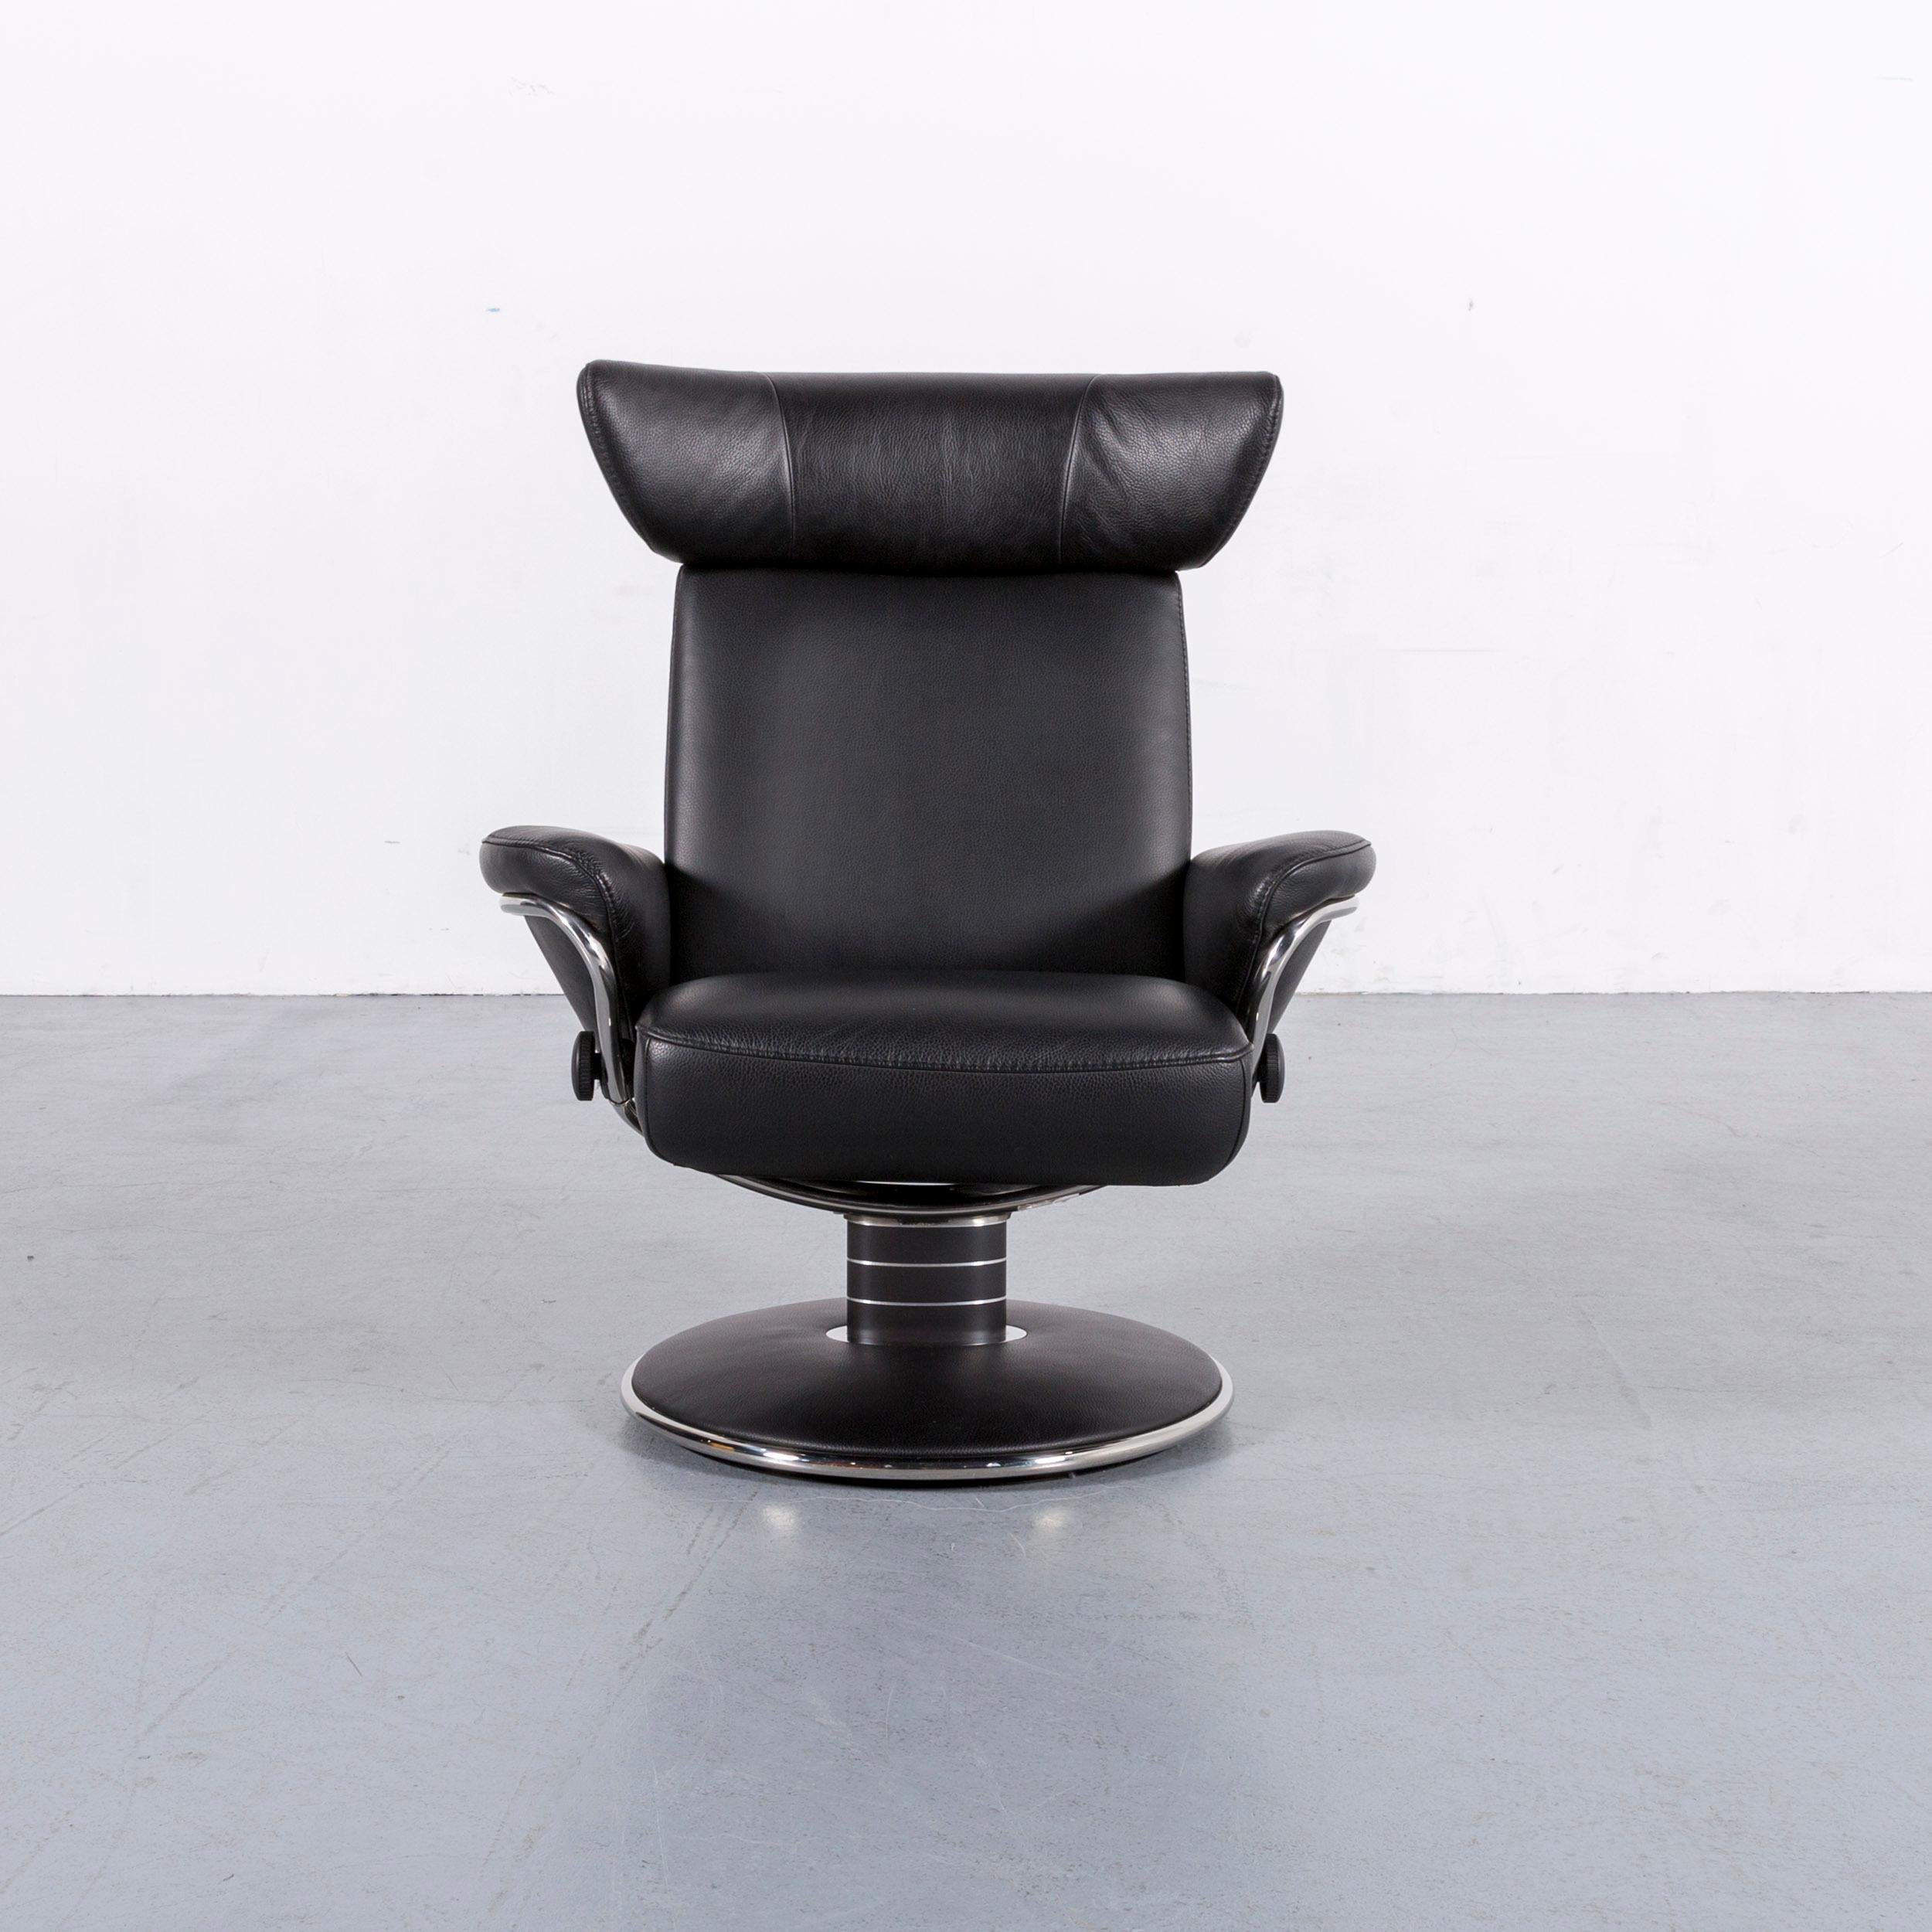 We bring to you an Ekornes Stressless jazz designer leather office chair black.